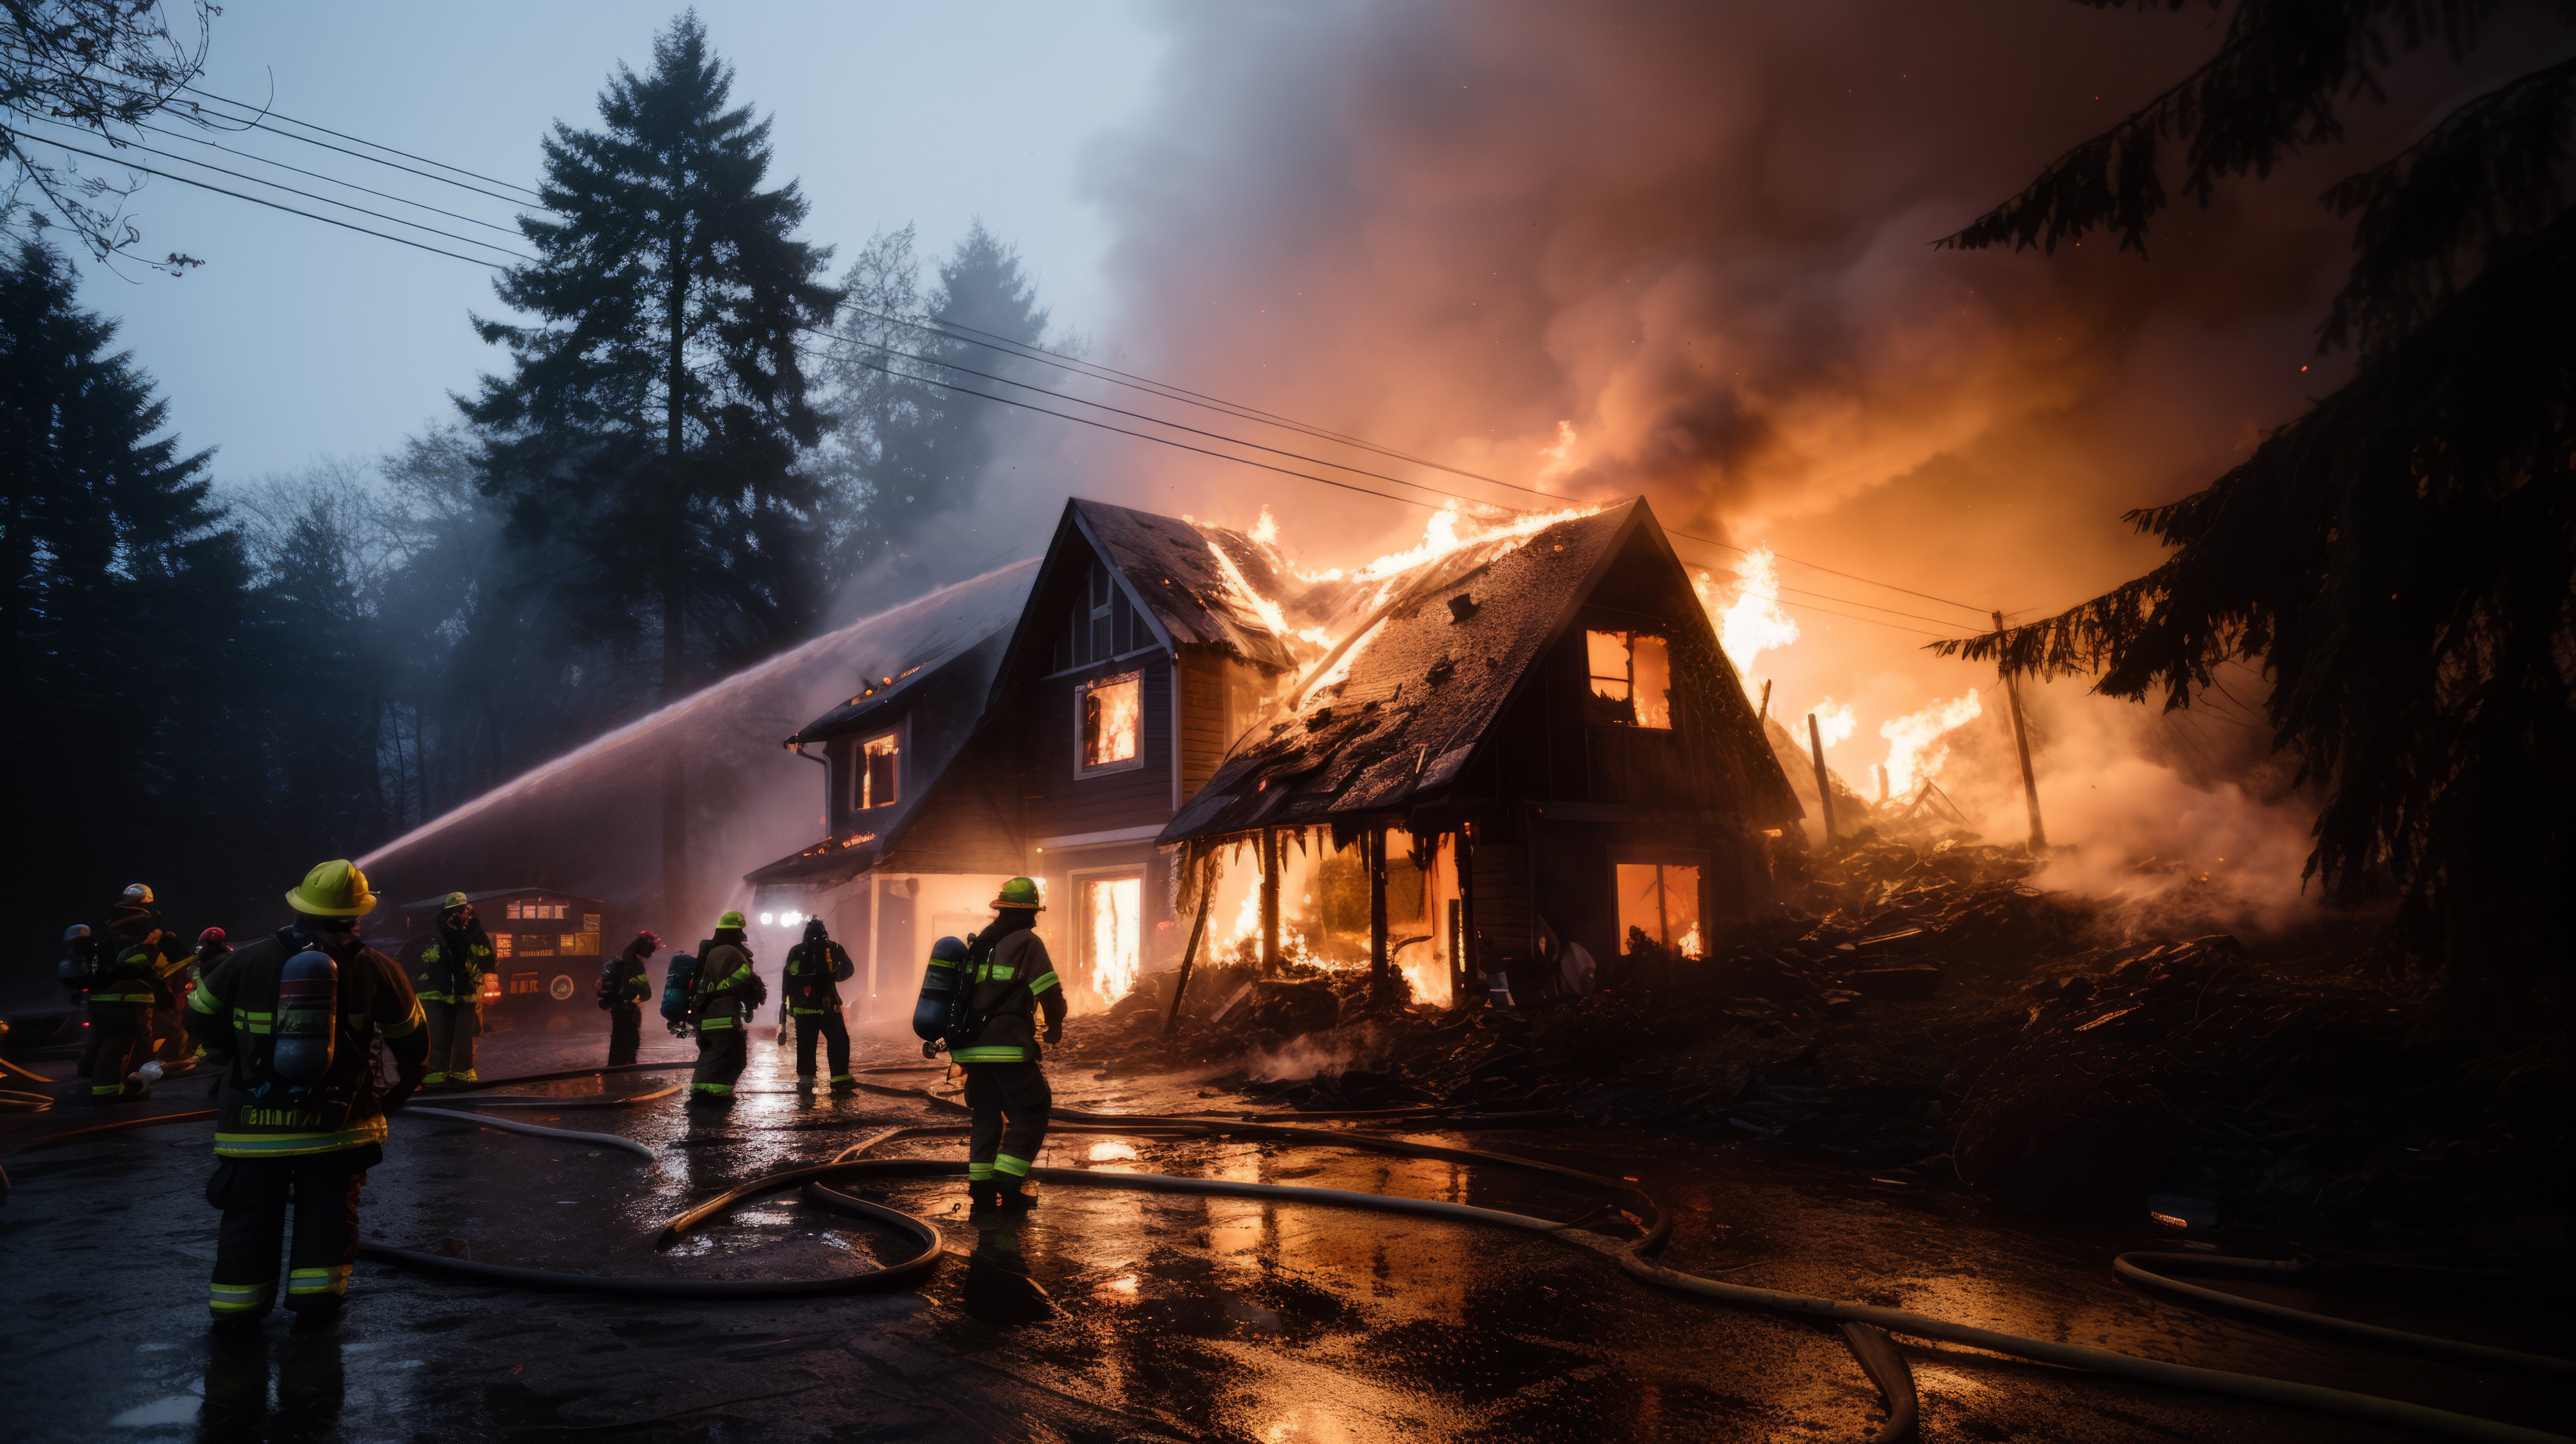 Home engulfed in flames with firefighters spraying water on it